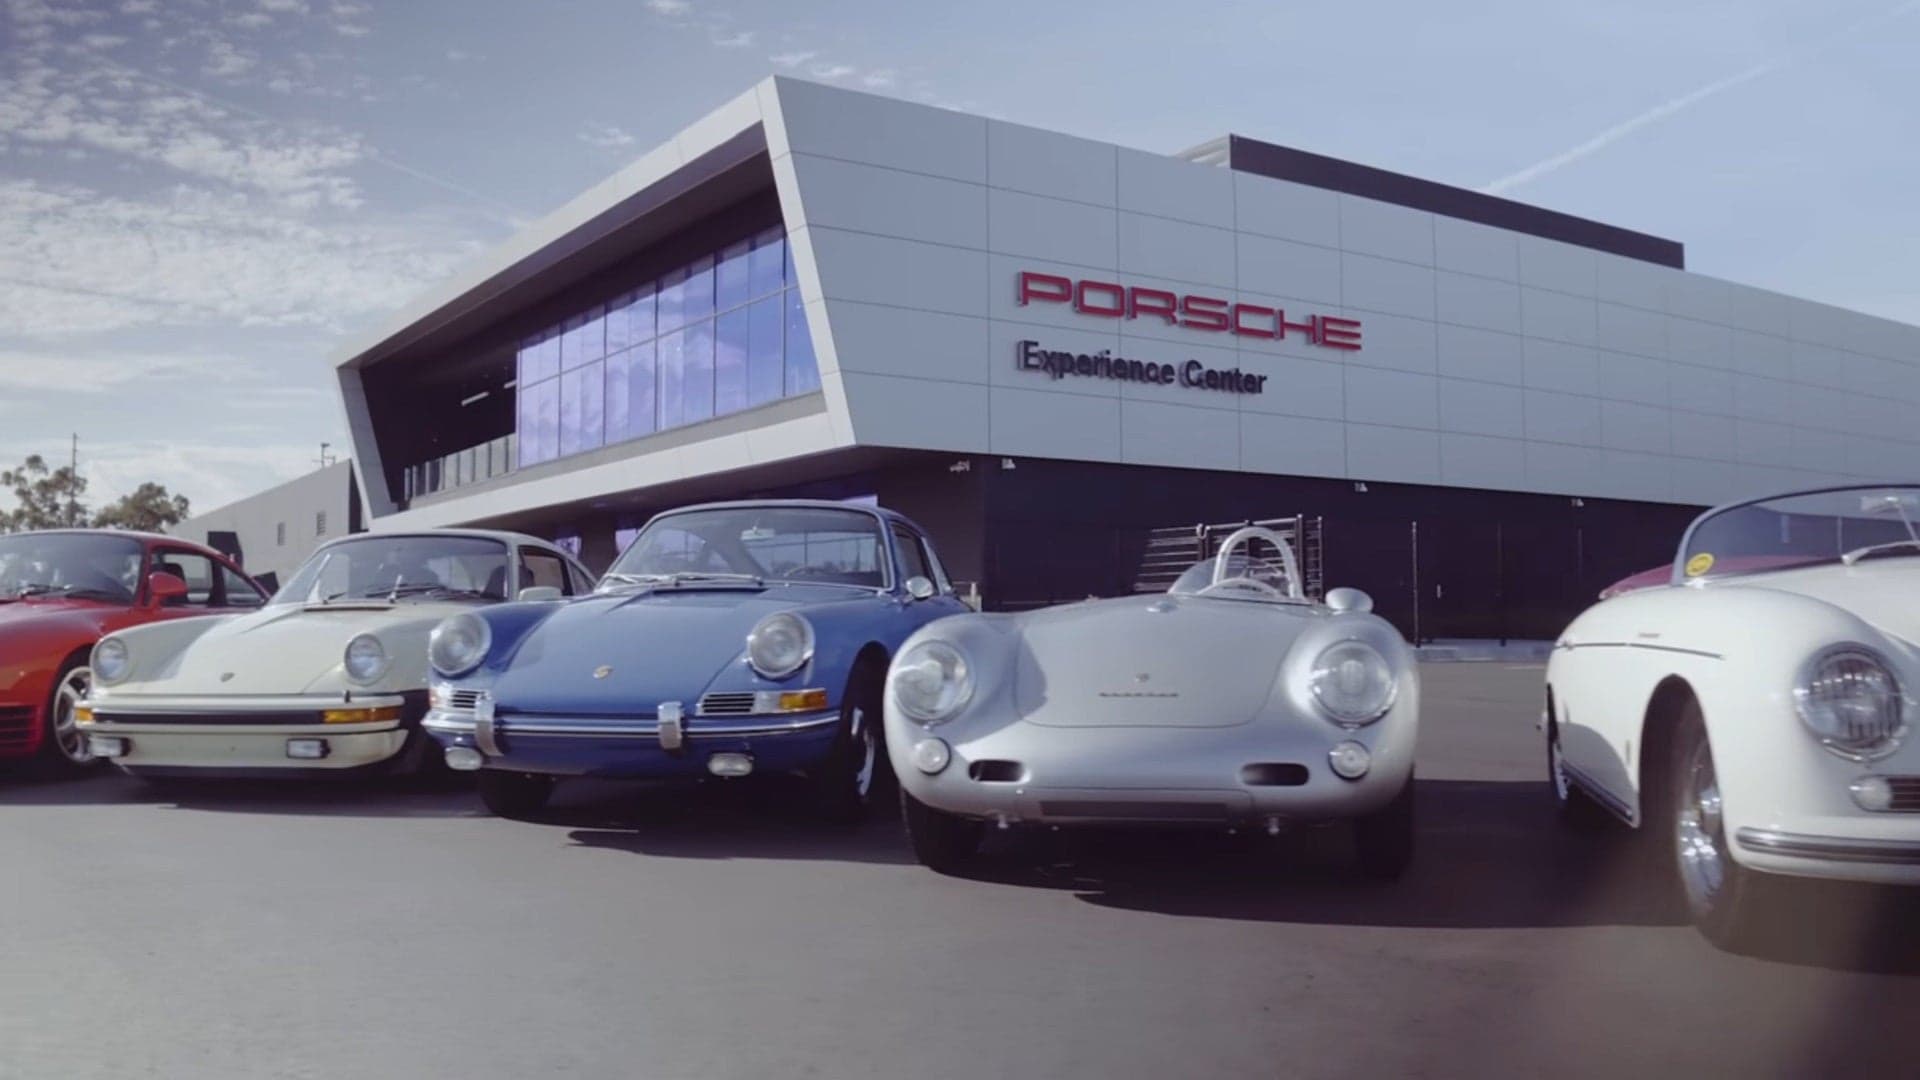 Watch Porsche Disrupt The Auto Industry In This New CNBC Documentary